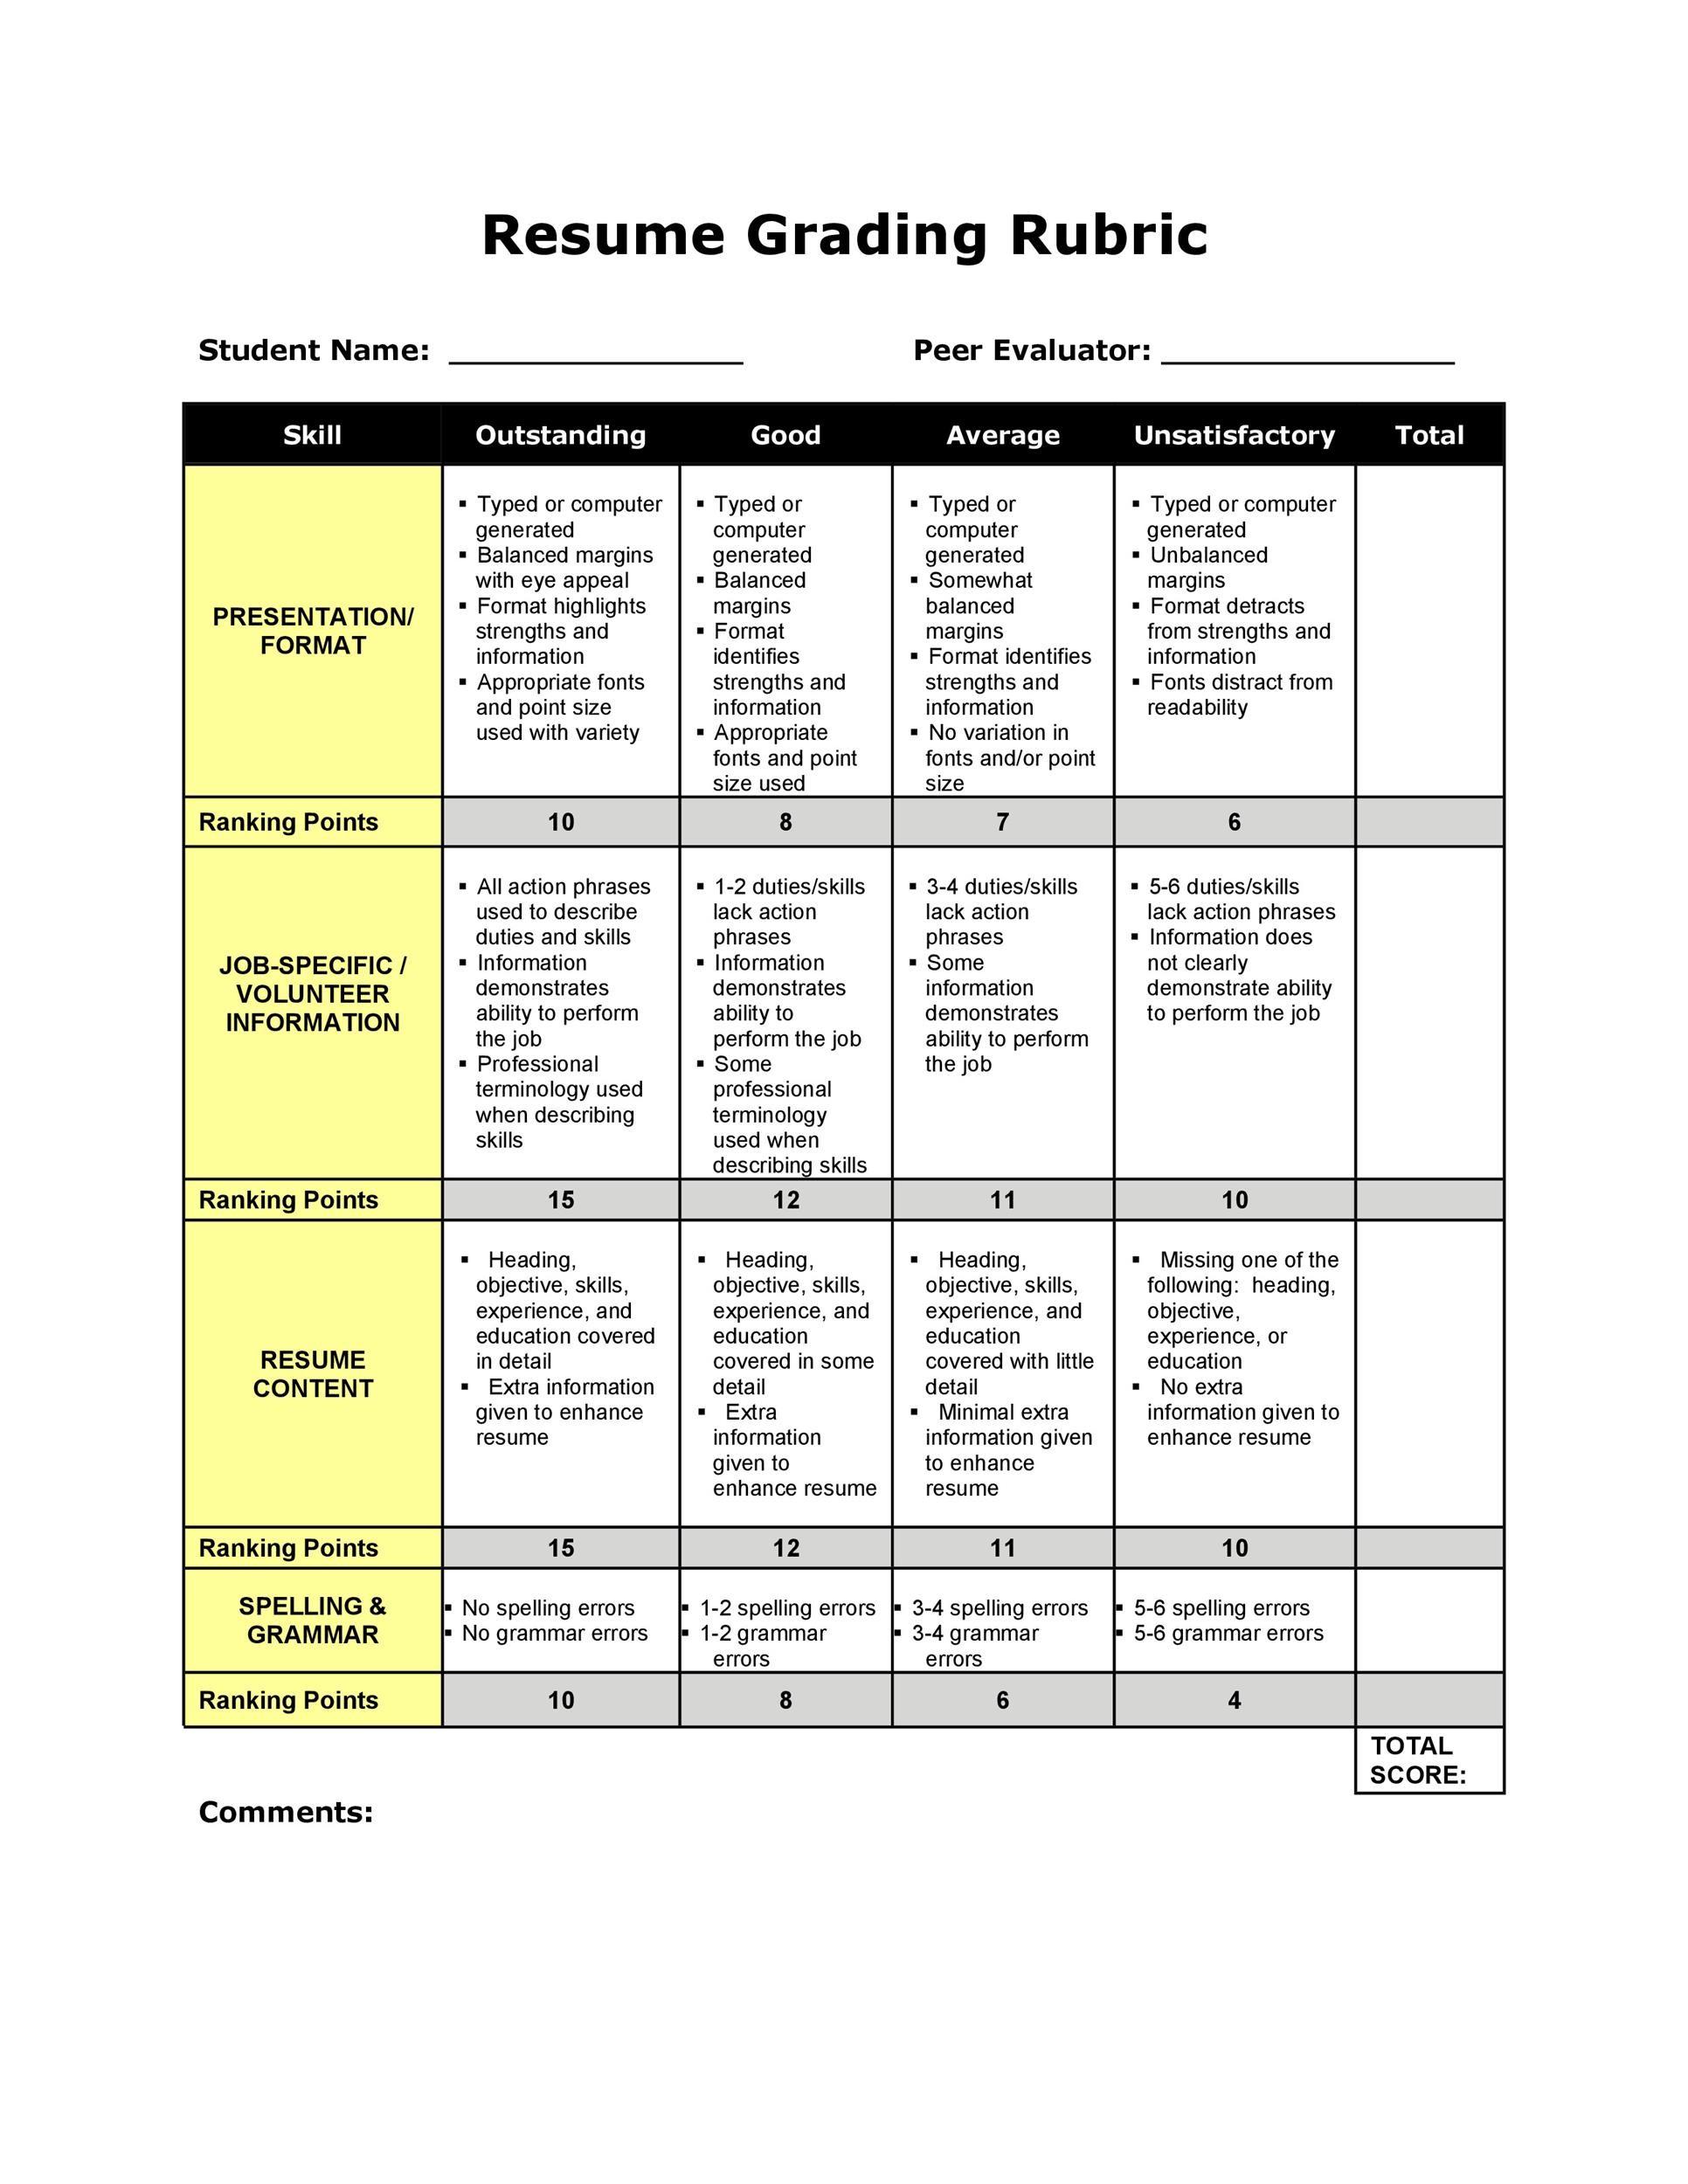 grading rubric for technical writing